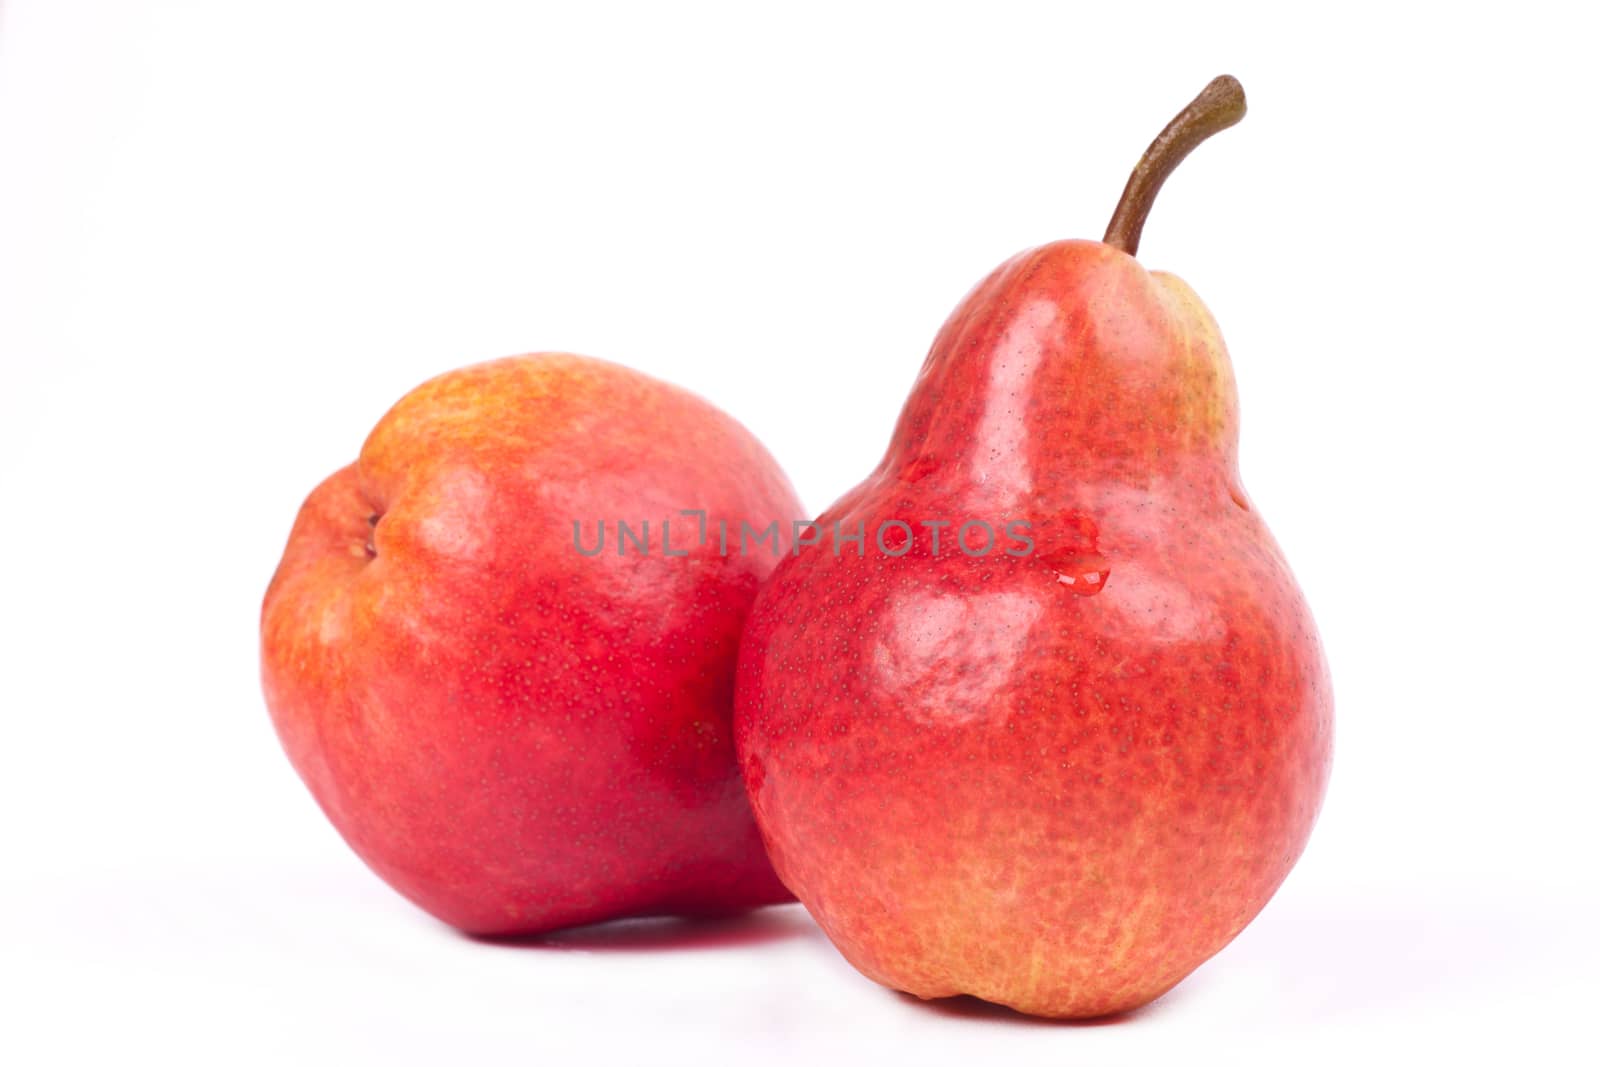 two red pears on white background